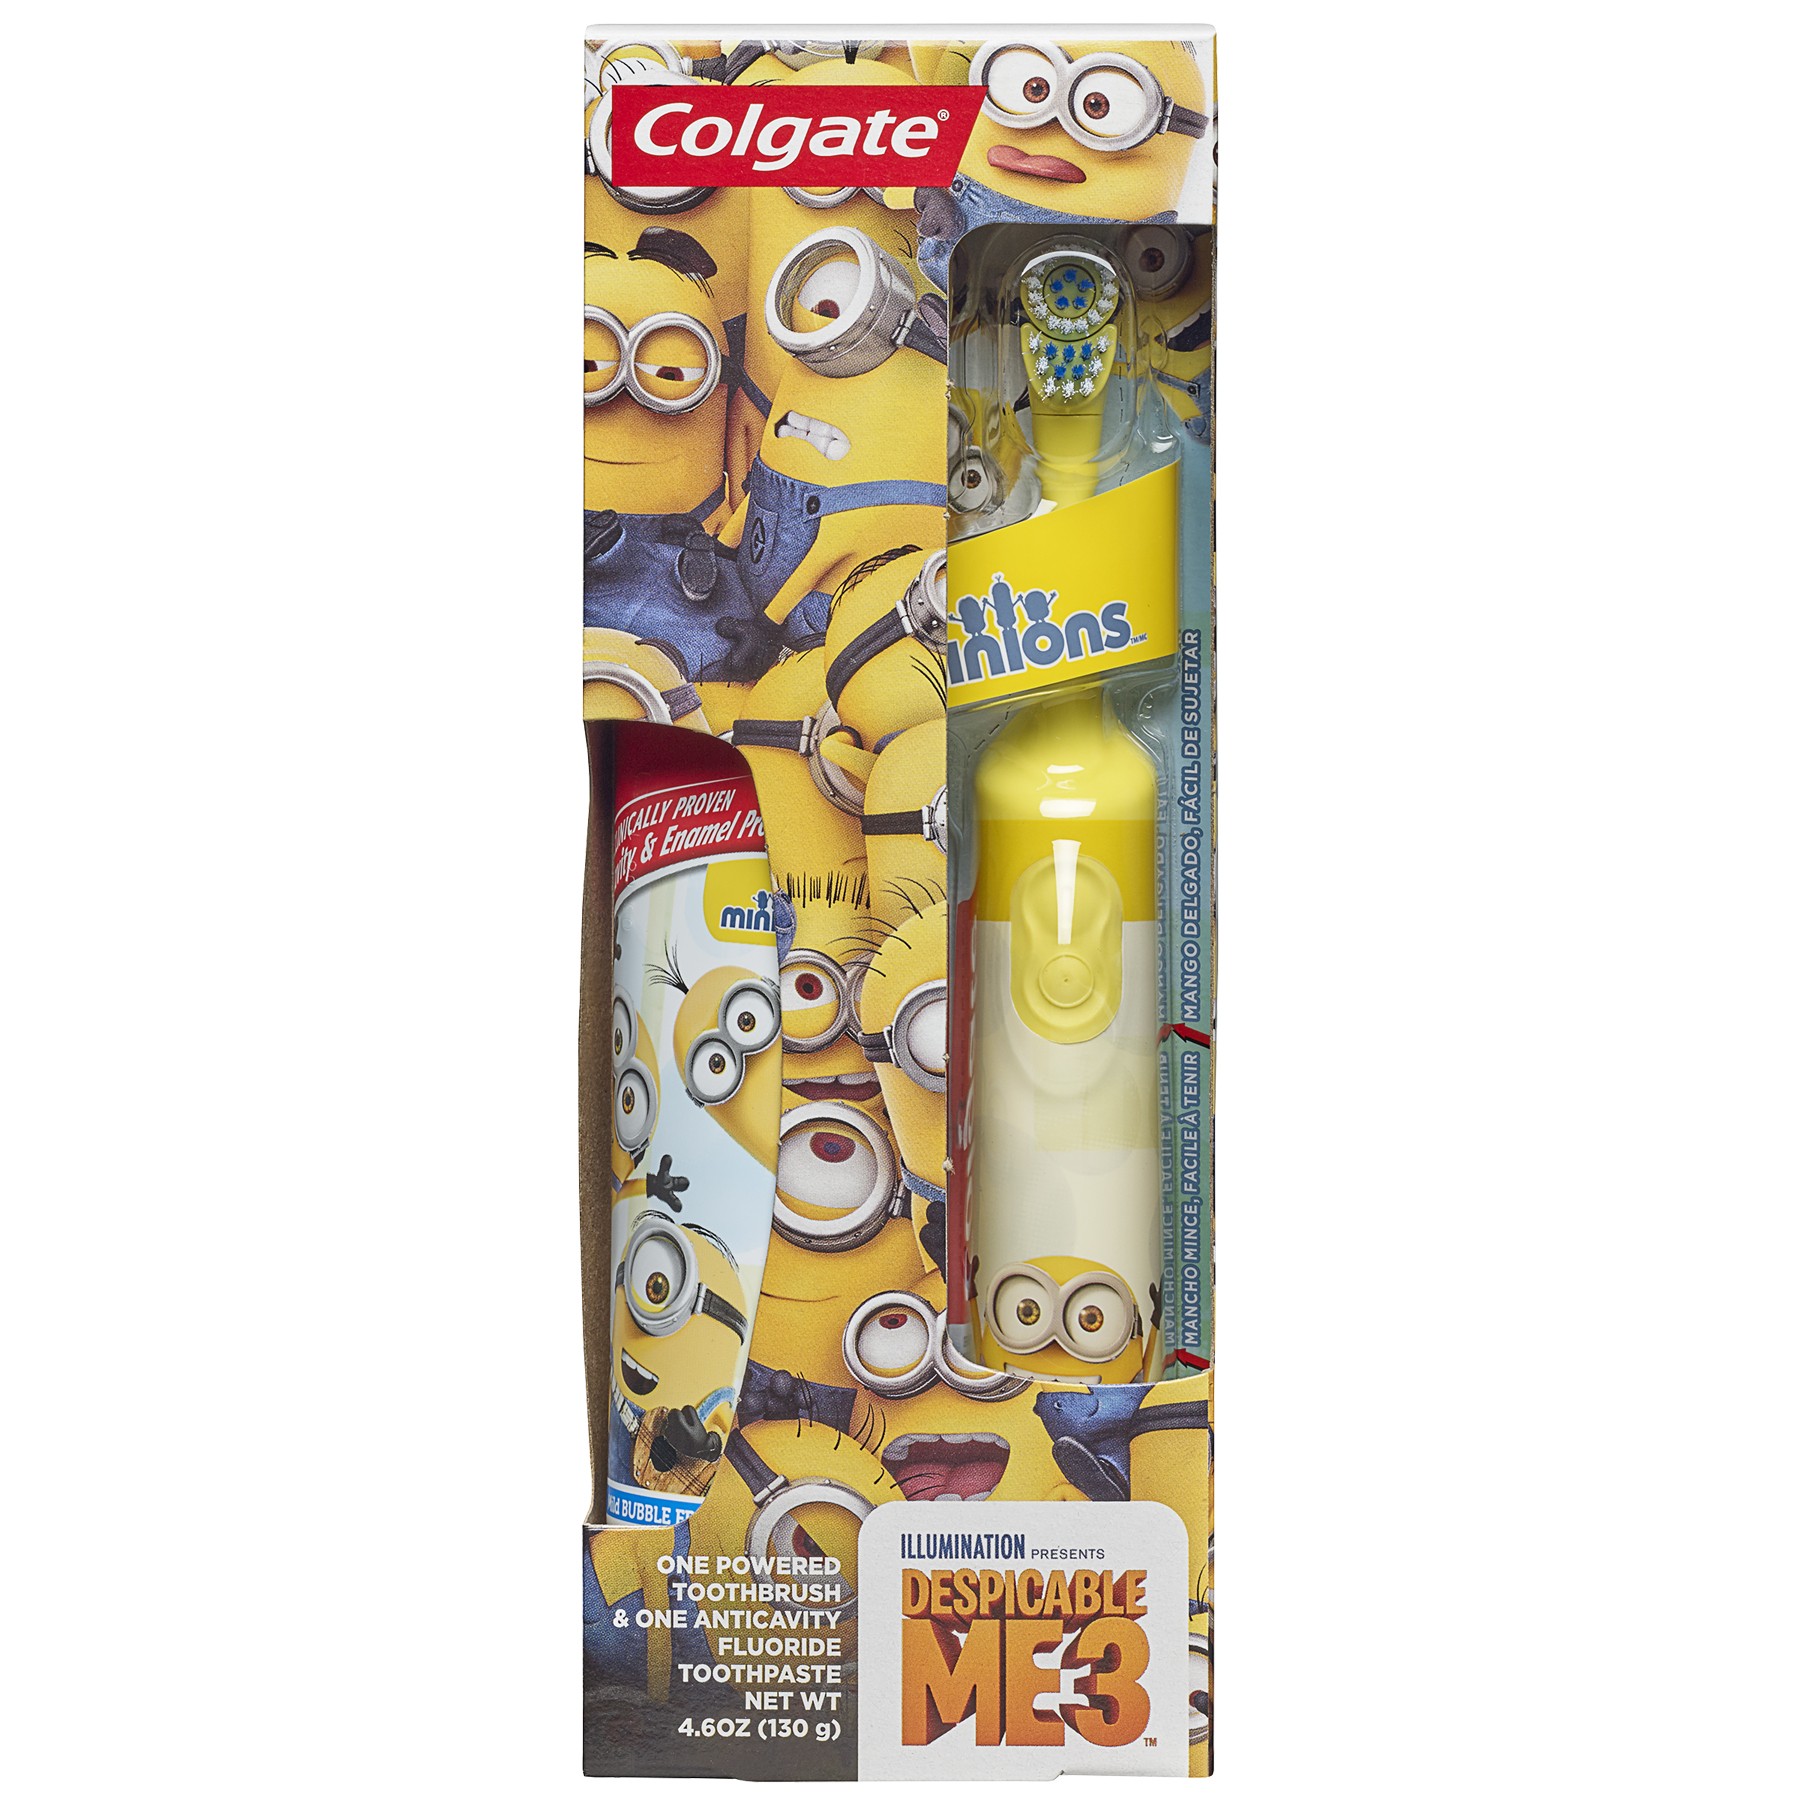 Colgate Kids Powered Toothbrush, Toothpaste Pack - Minions - image 1 of 10